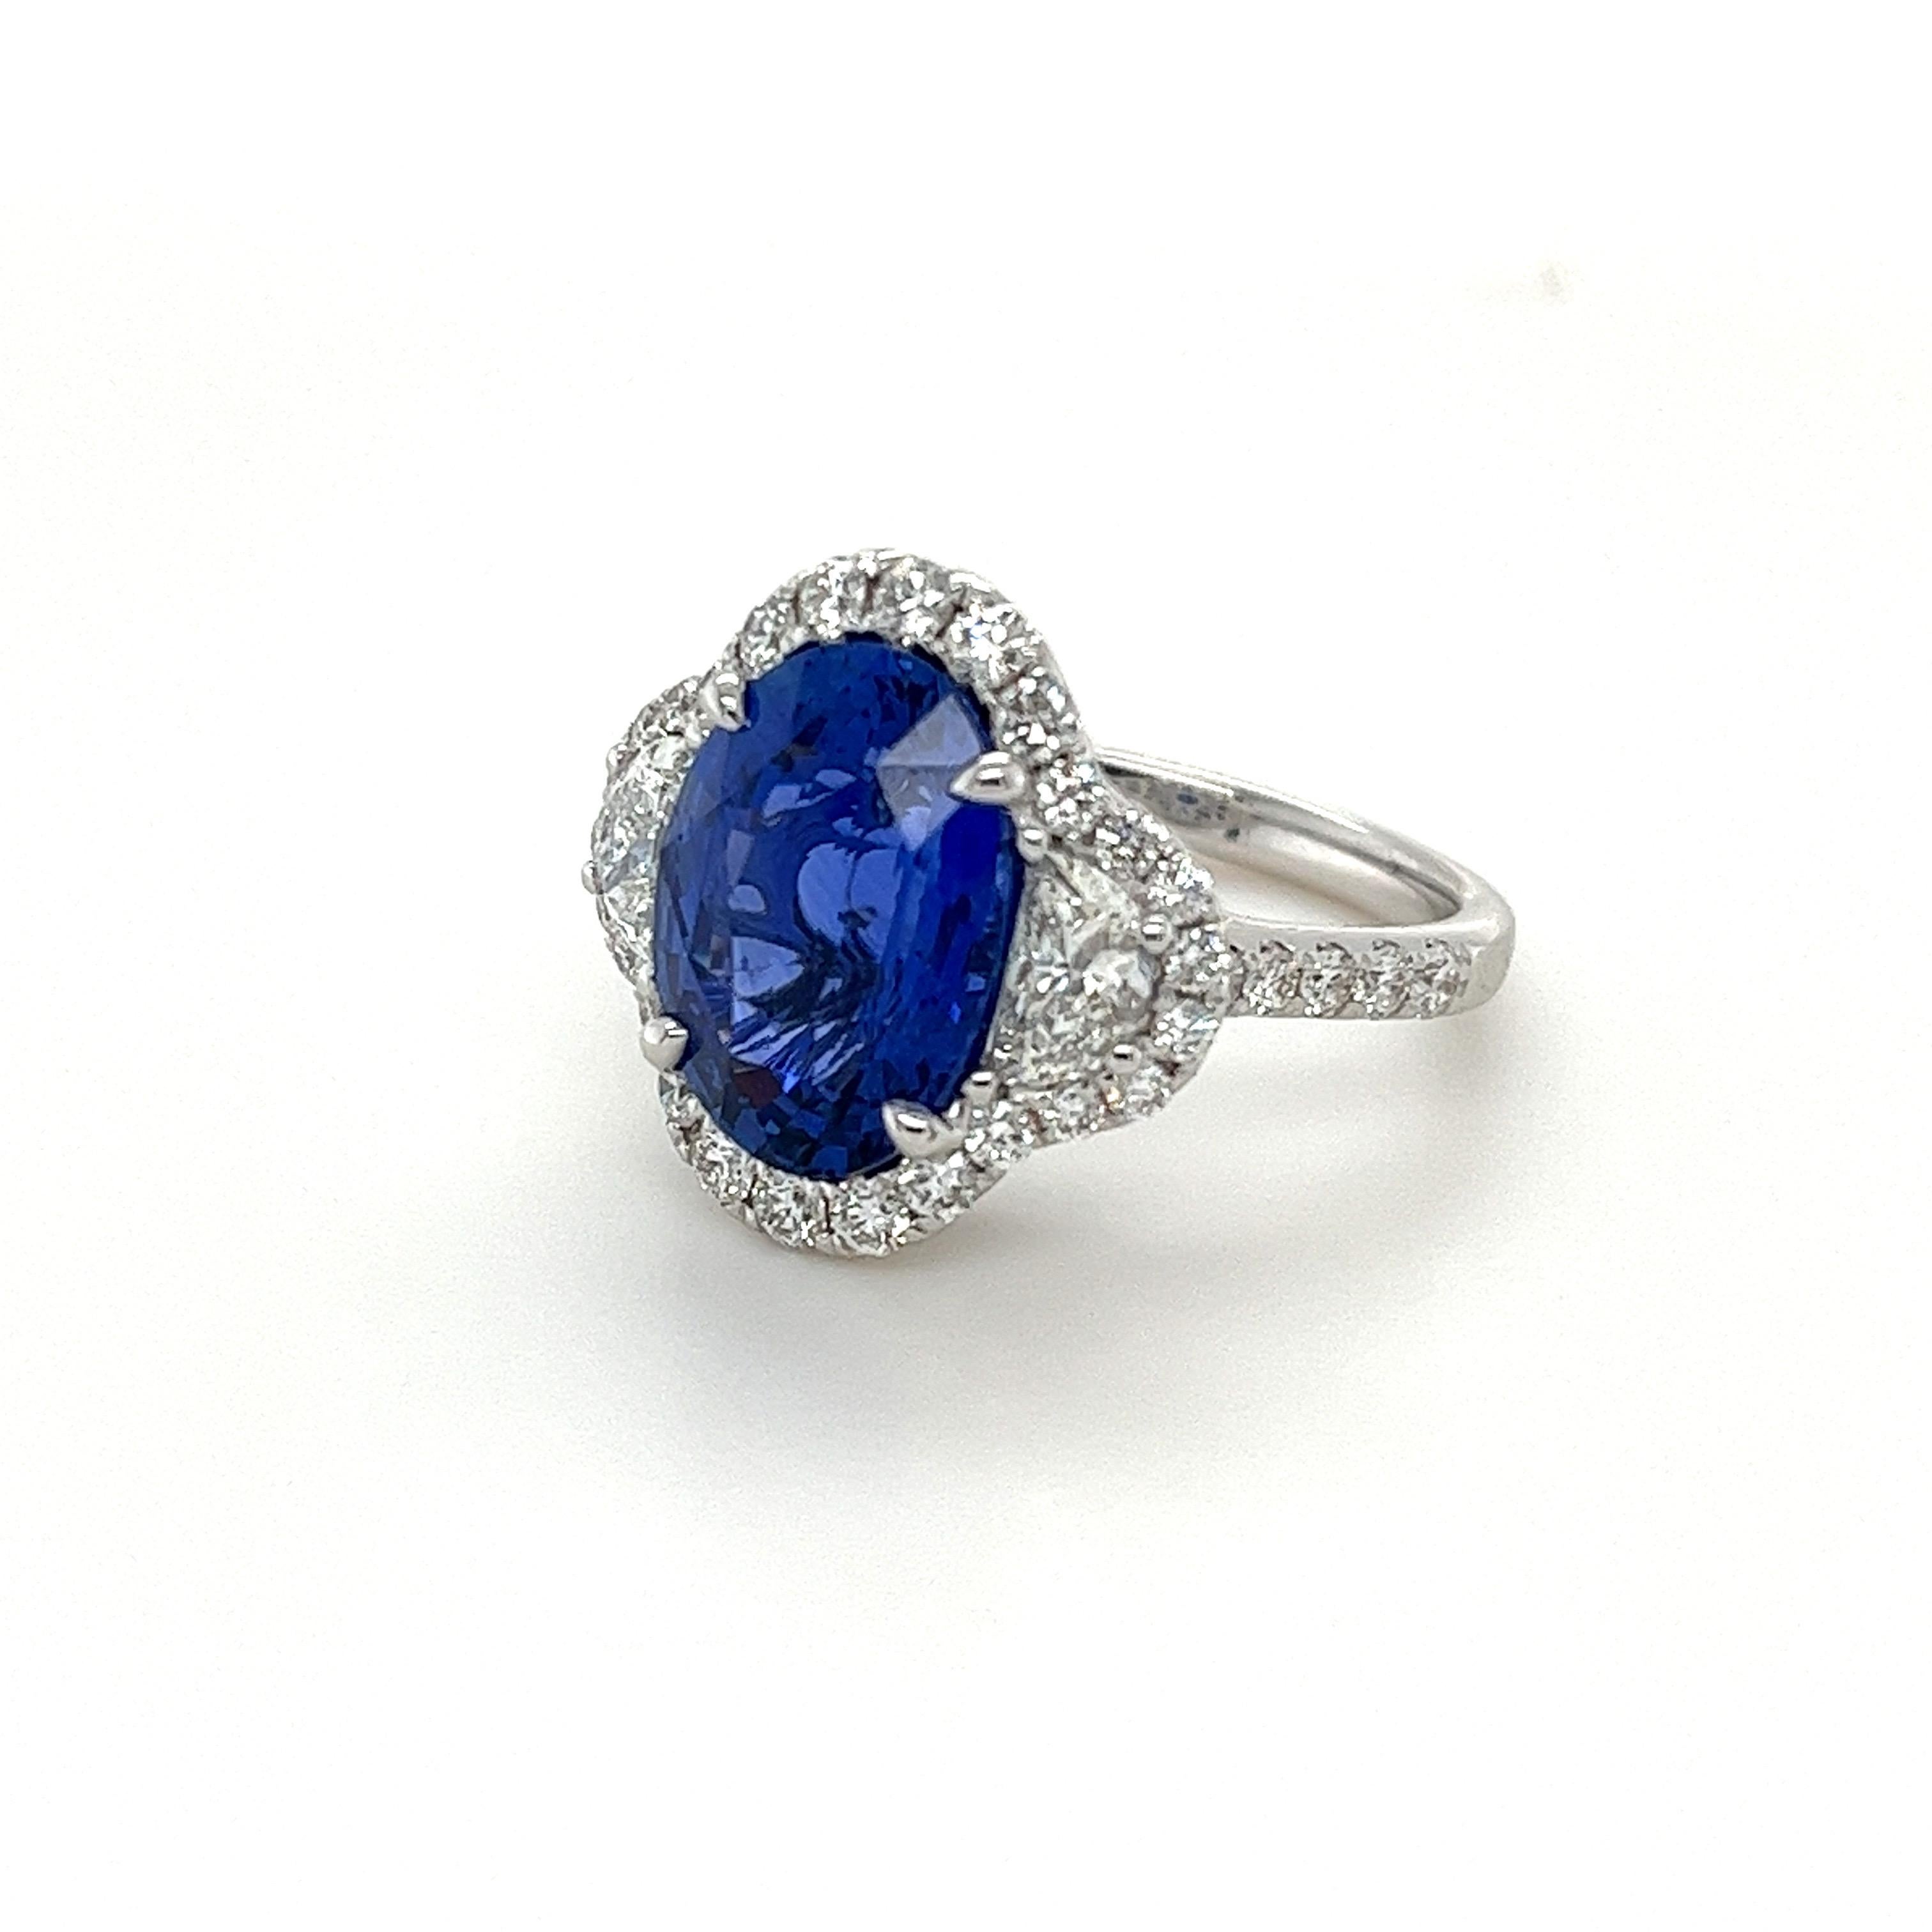 Certified oval Ceylon Sapphire weighing 5.67 carats
Measuring (12.62x9.26x5.95) mm
Half Moon Diamonds weighing .65 carats
36 round diamonds weighing .78 carats
H VS2-SI1
Set in 18k white gold ring
5.99 g